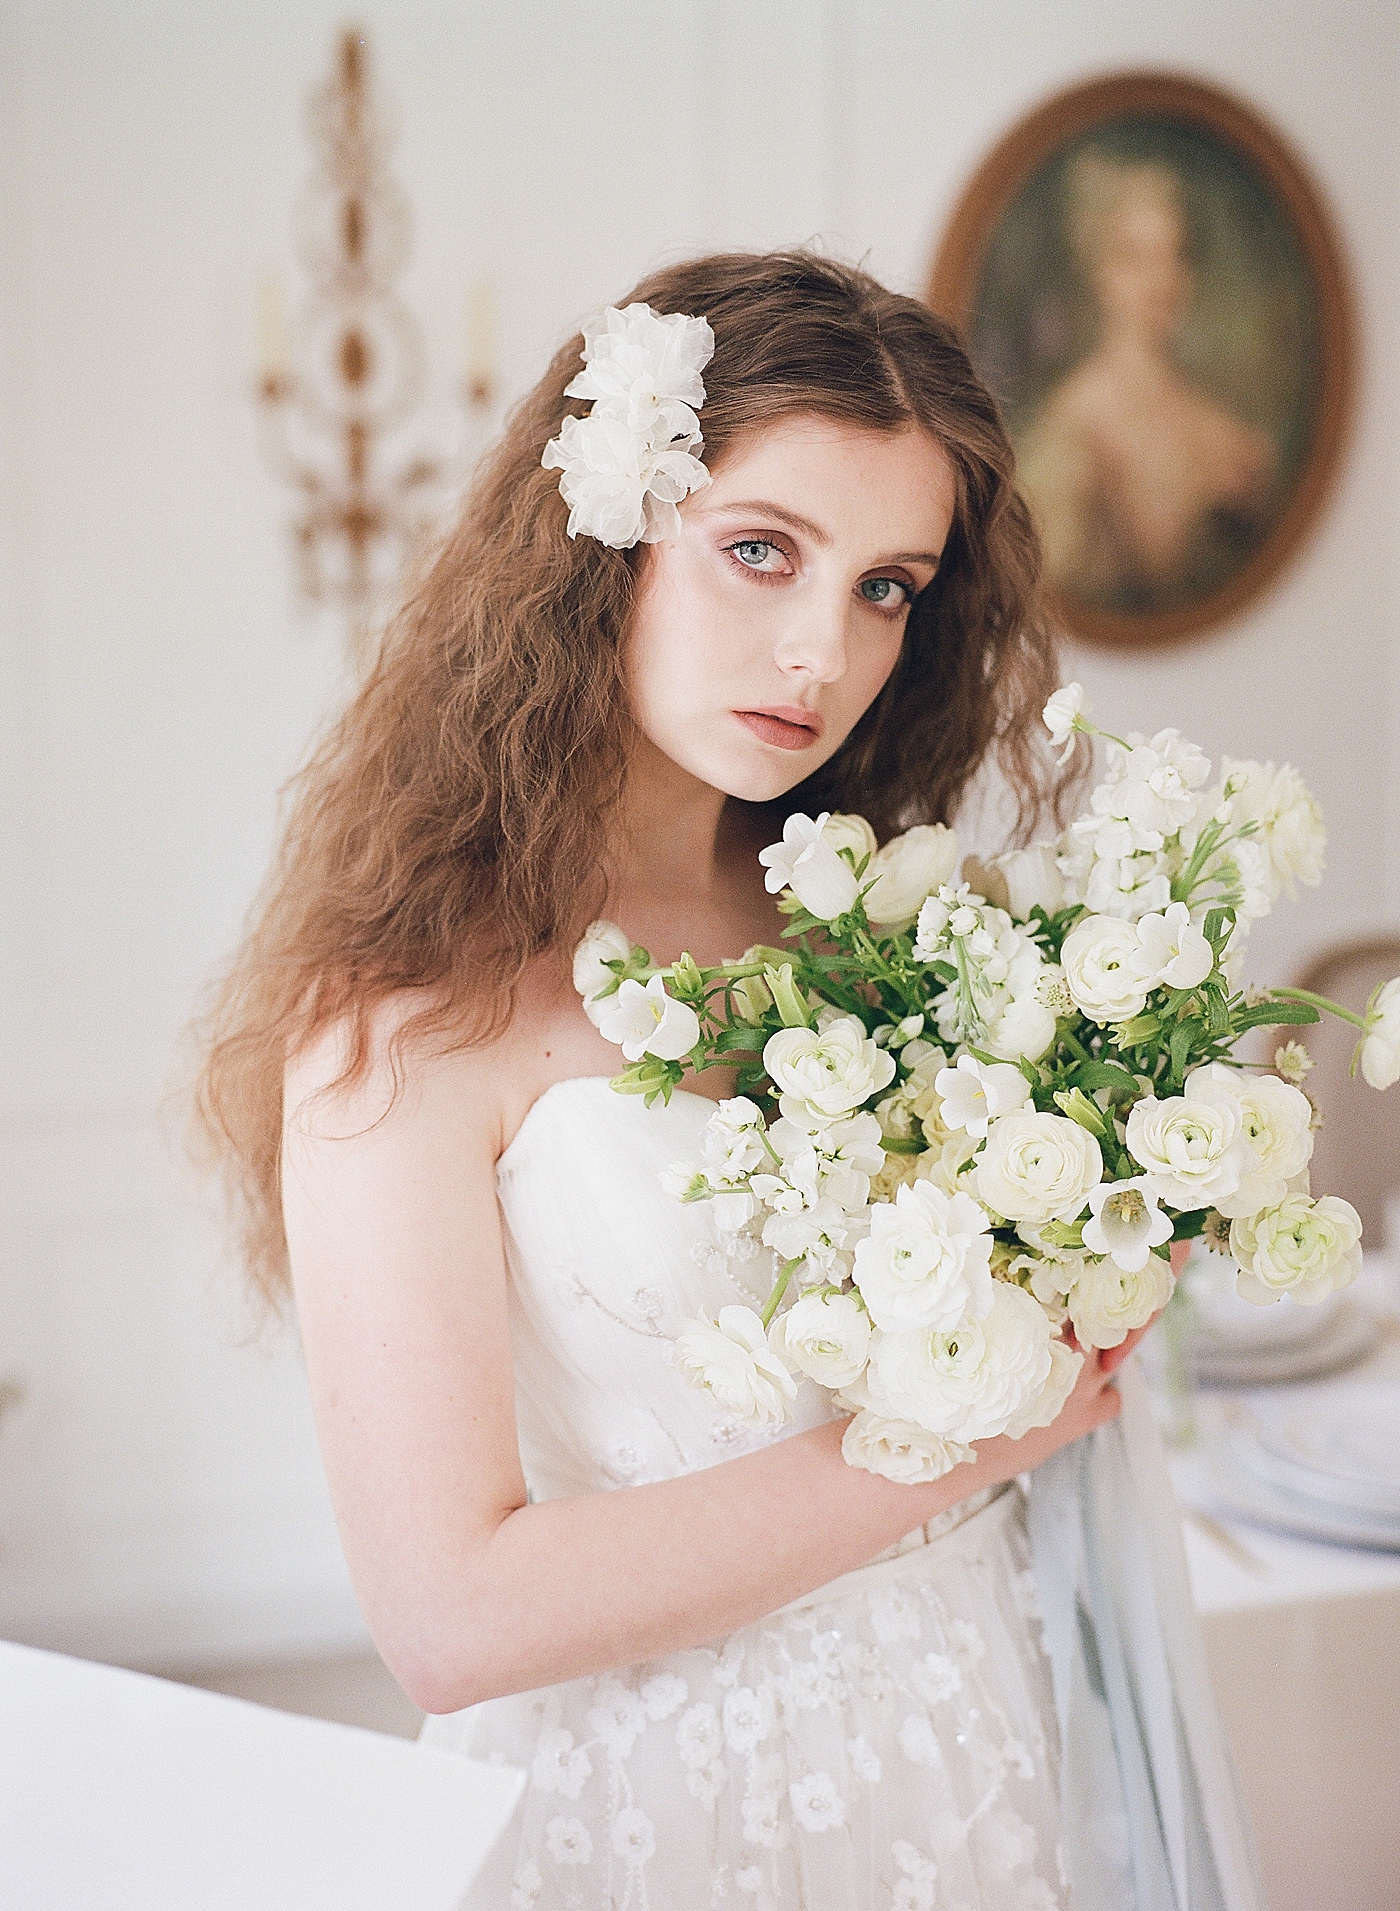 Bride holding a bouquet during Old World Romance Editorial | Photo by Hope Helmuth Photograpghy